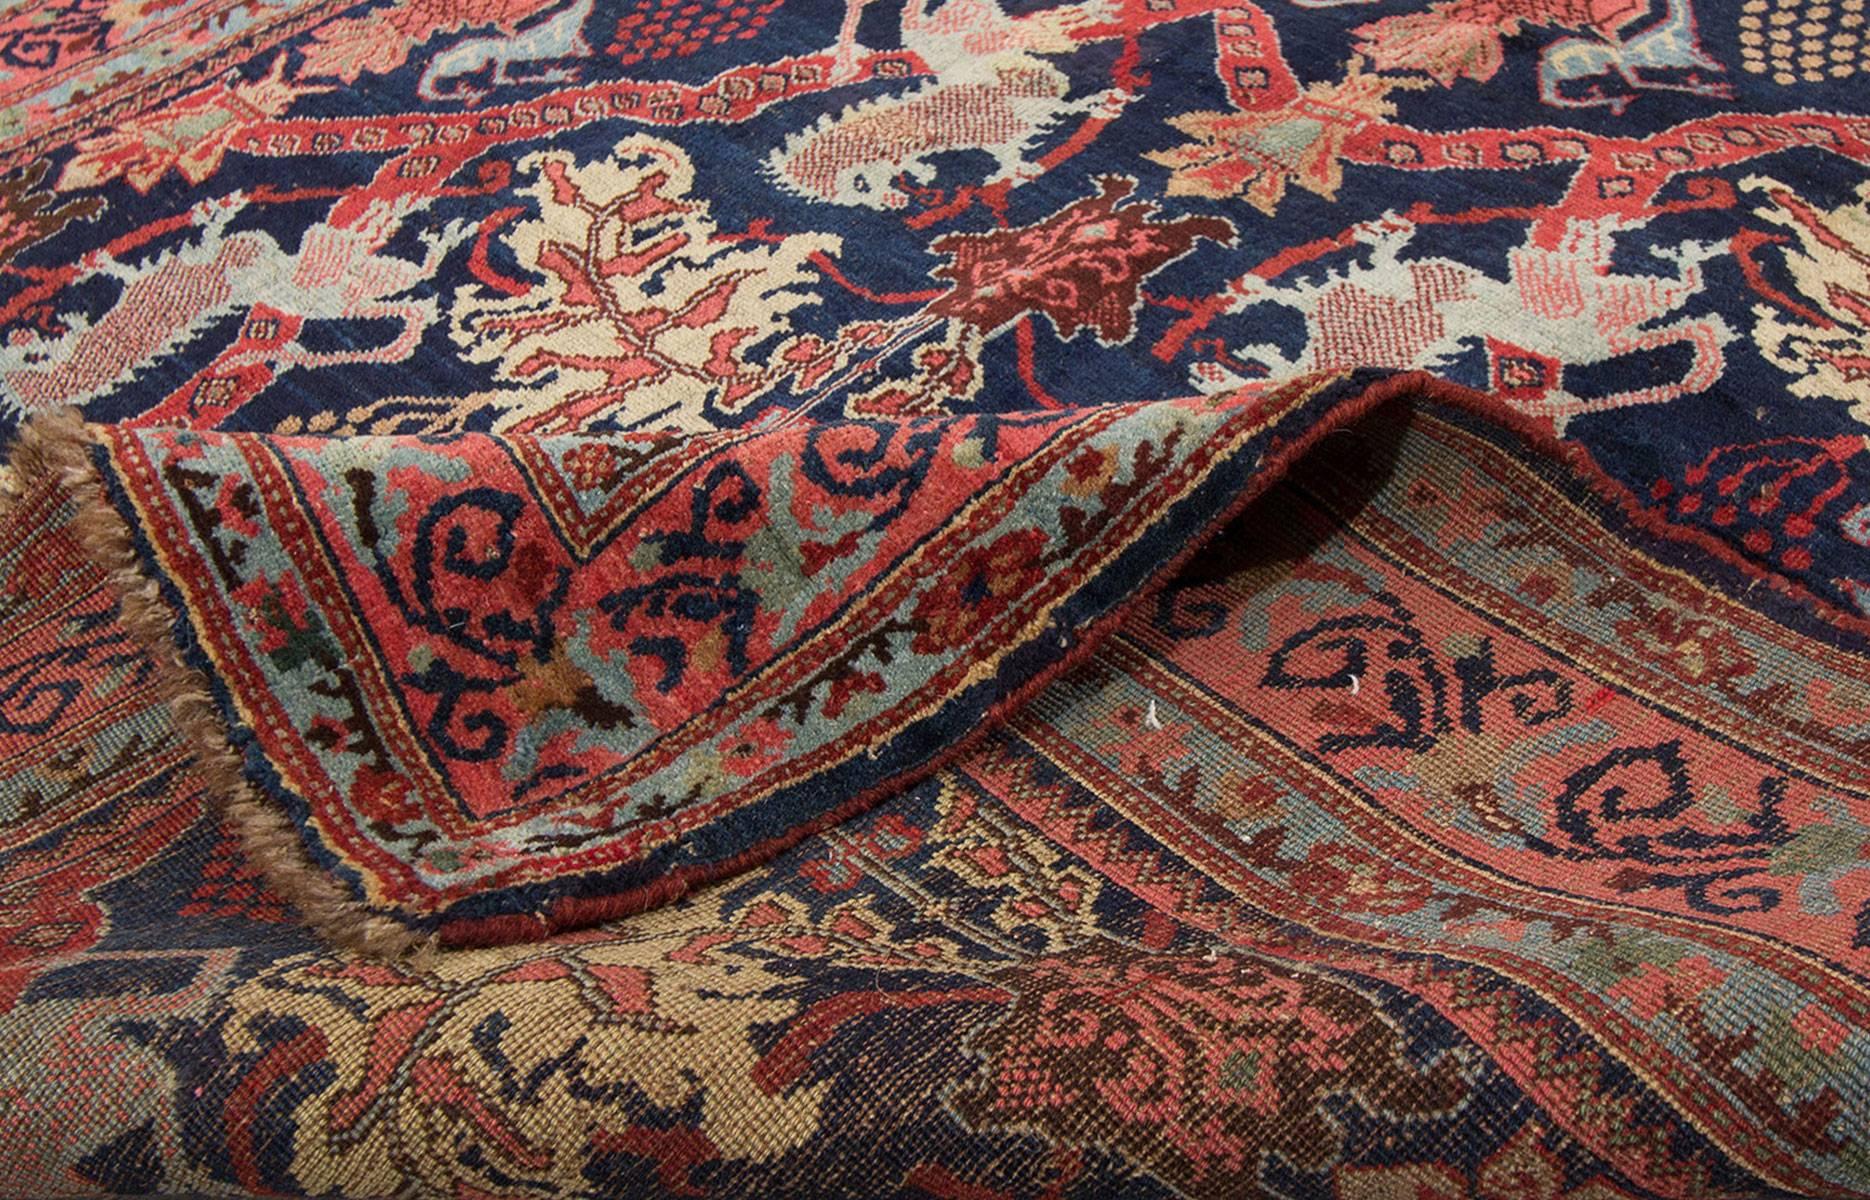 Antique Red and Blue All-Over Persian Bidjar Carpet, 4.05x6.10 In Excellent Condition For Sale In Norwalk, CT